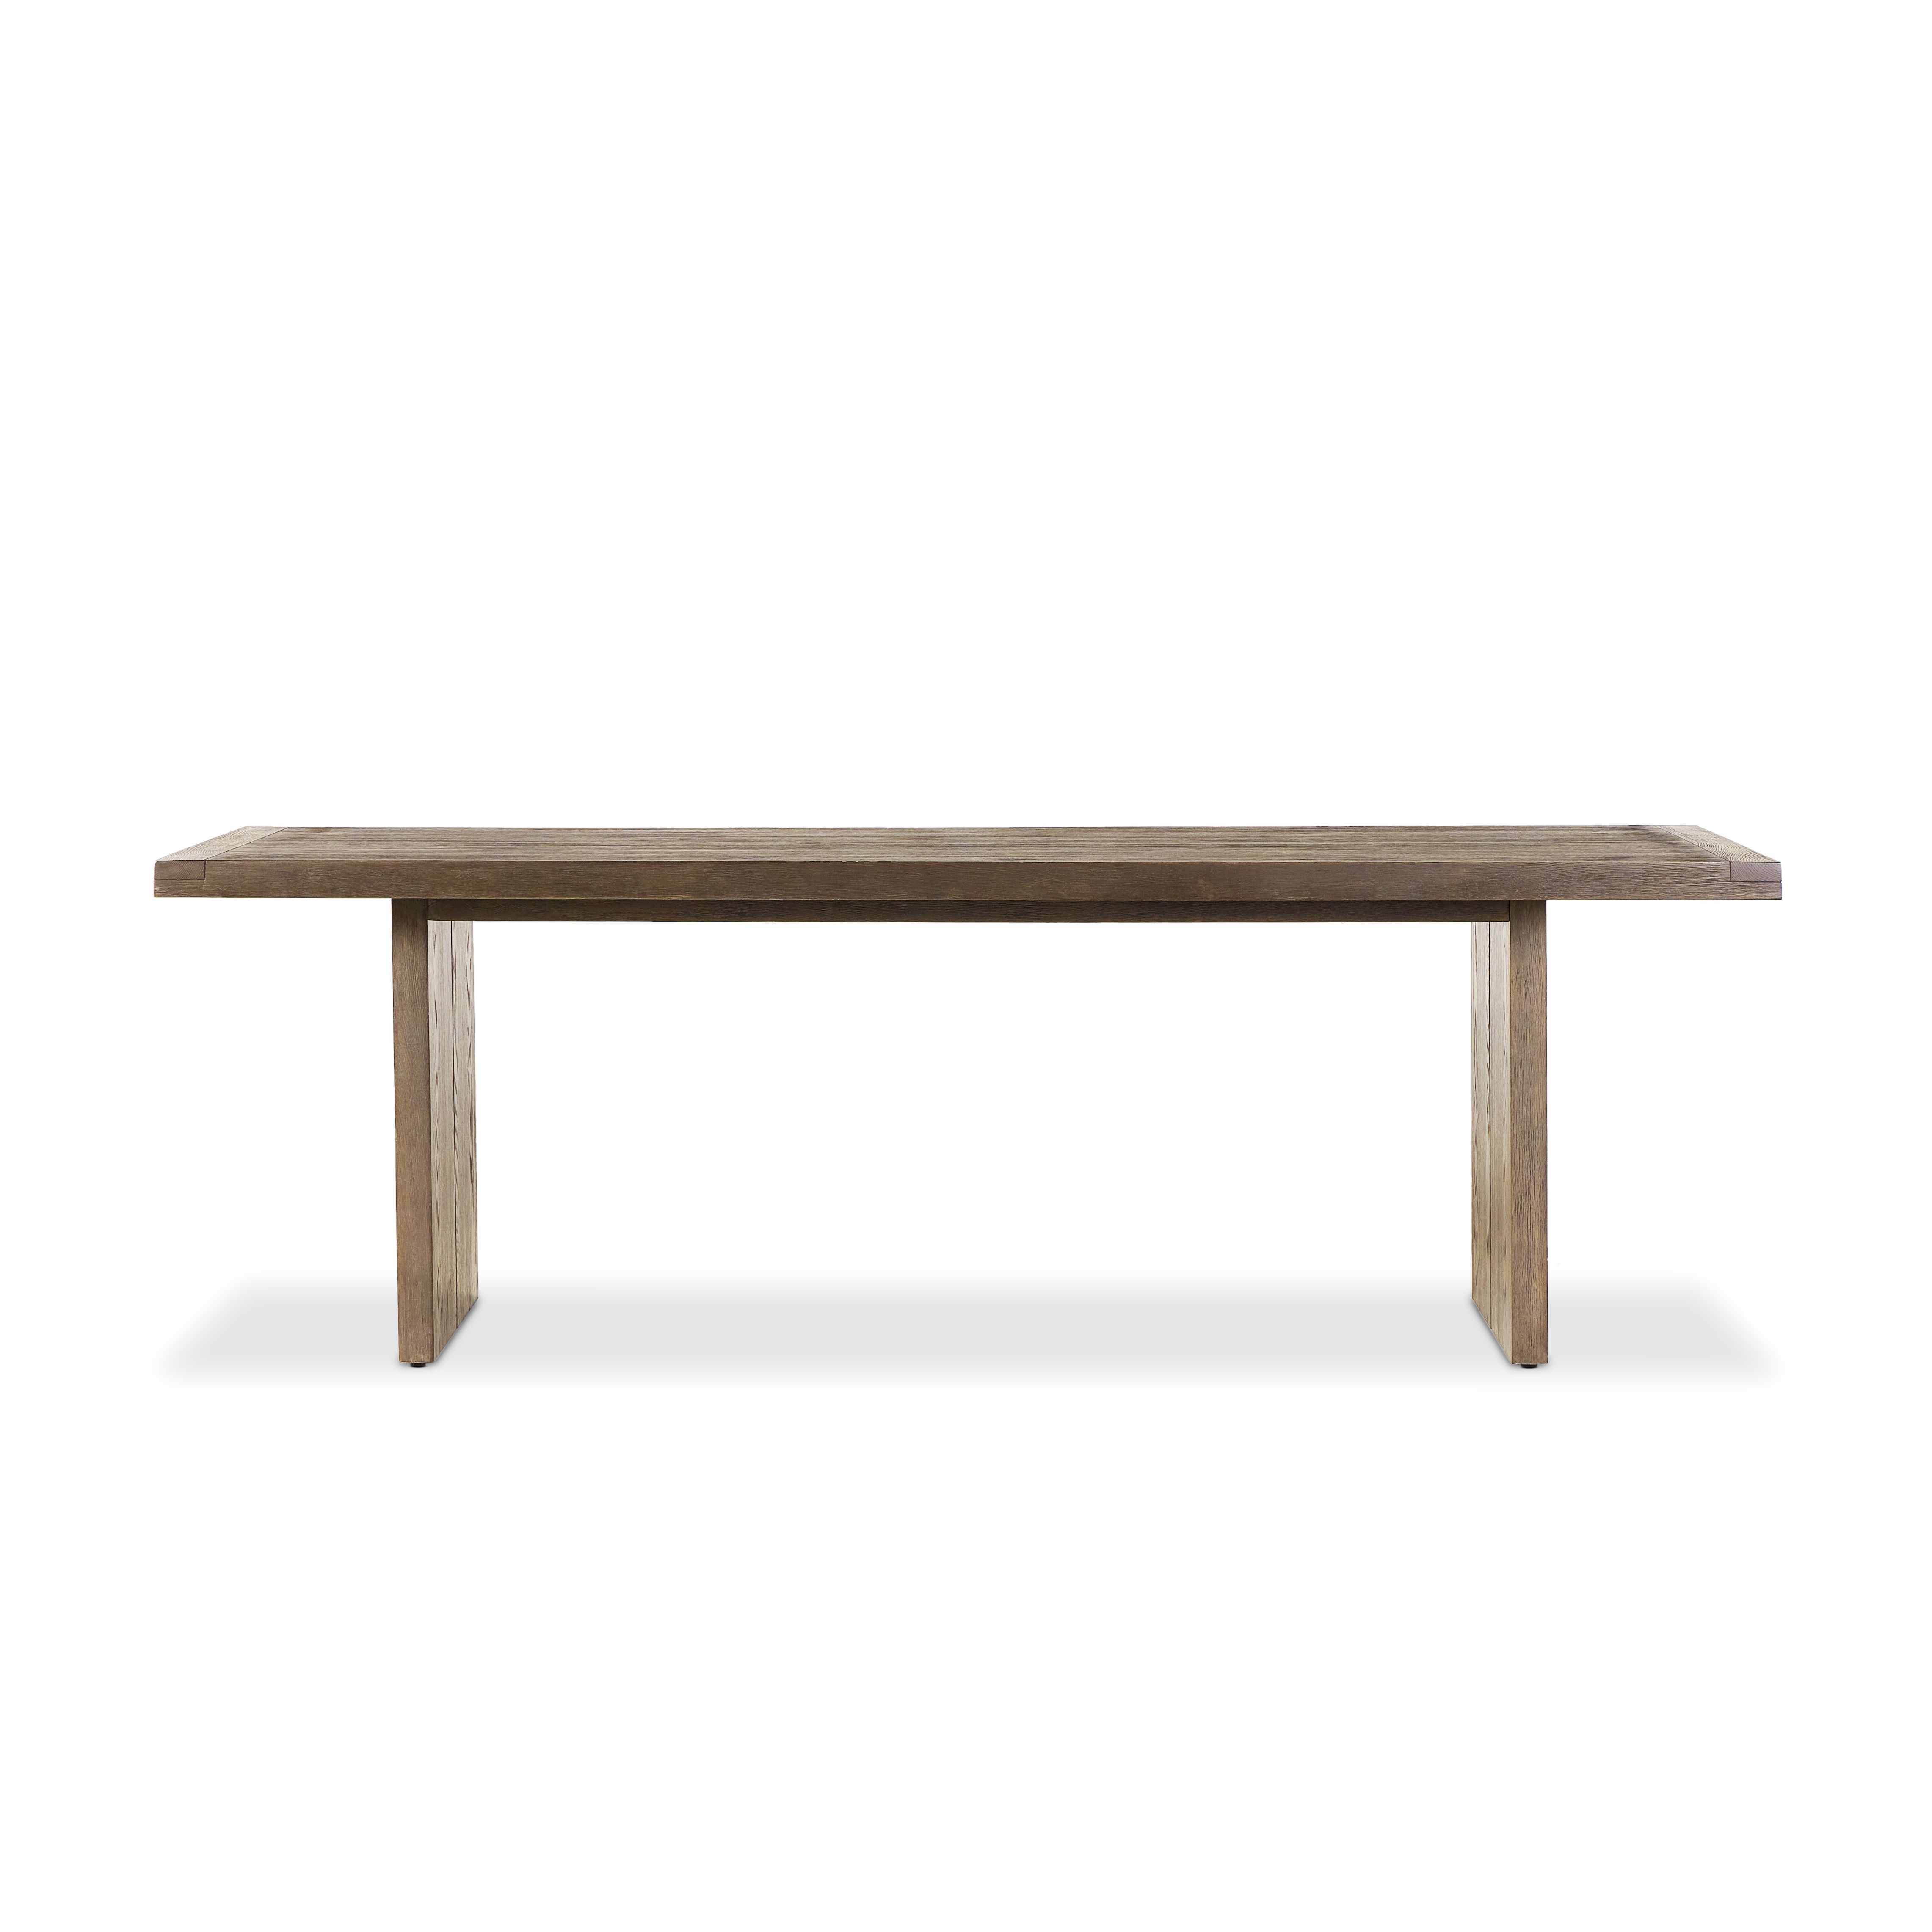 Warby Dining Table 94"-Worn Oak - Image 3